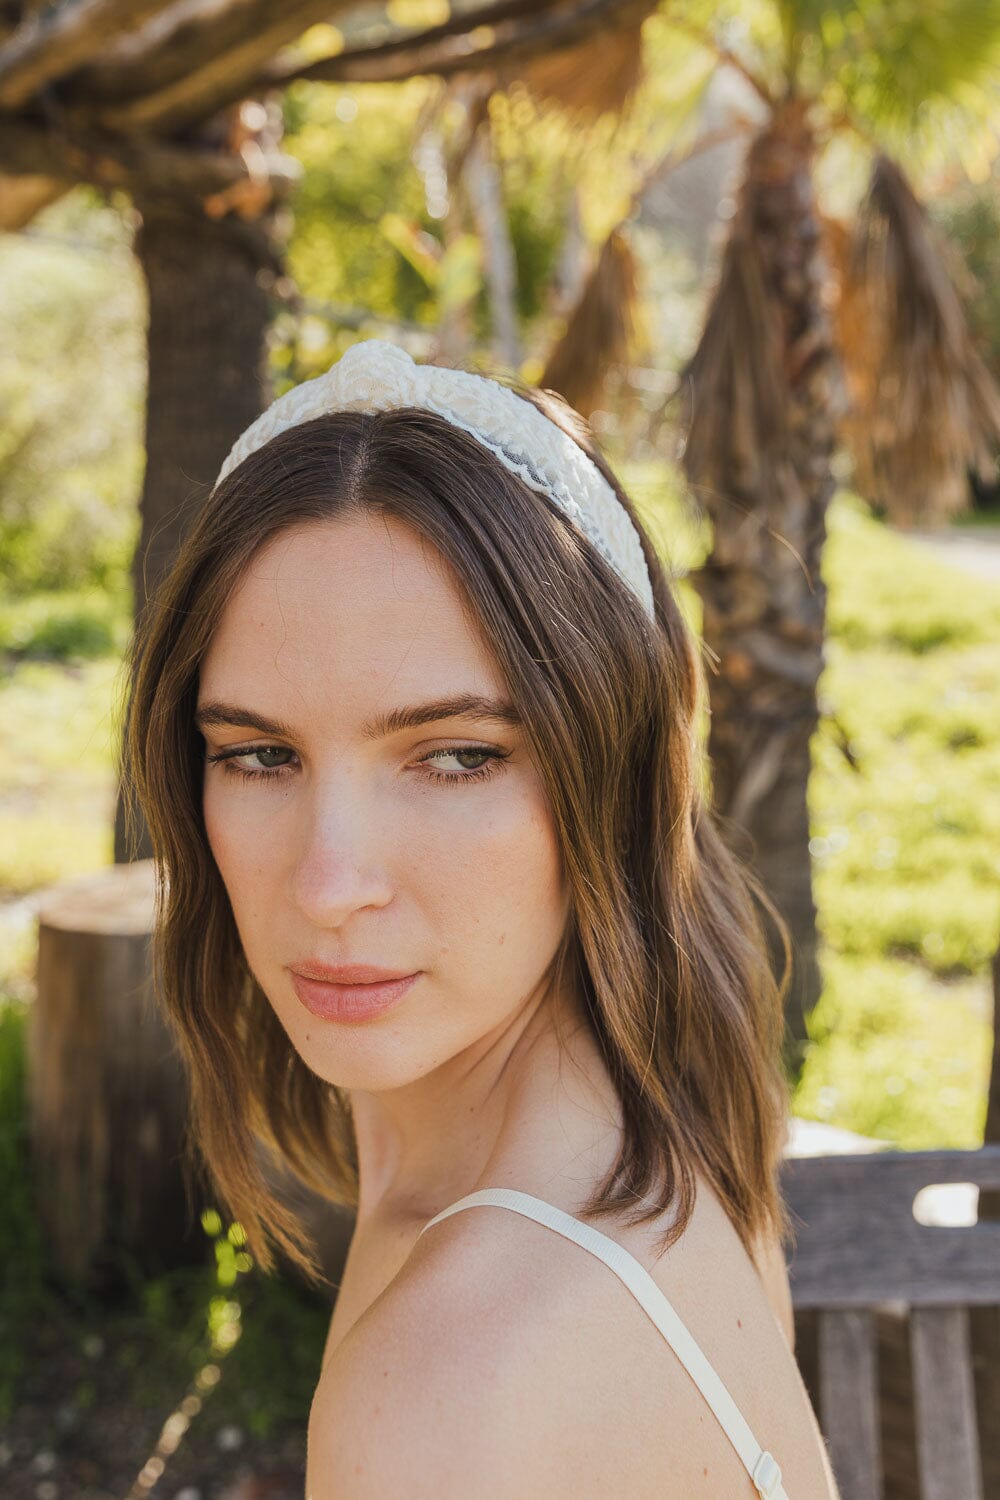 Embroidered Floral Vine Headband Hats & Hair Leto Collection 